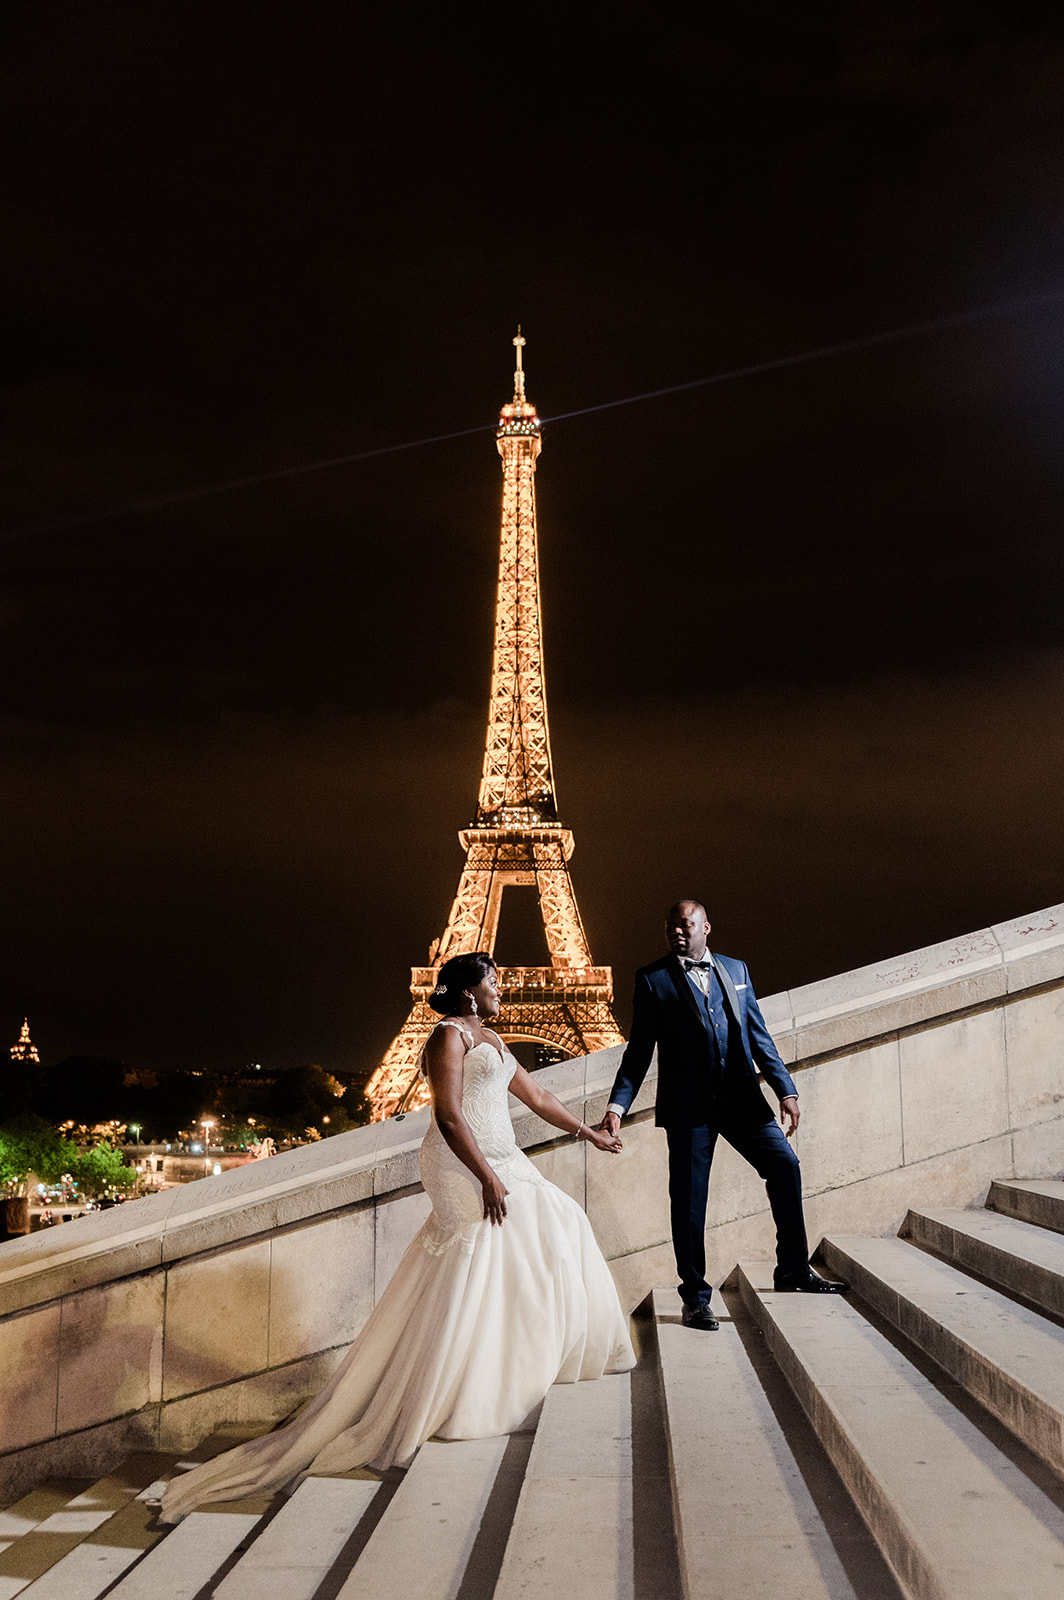 The famous stairs at Trocadero by night with bride and groom